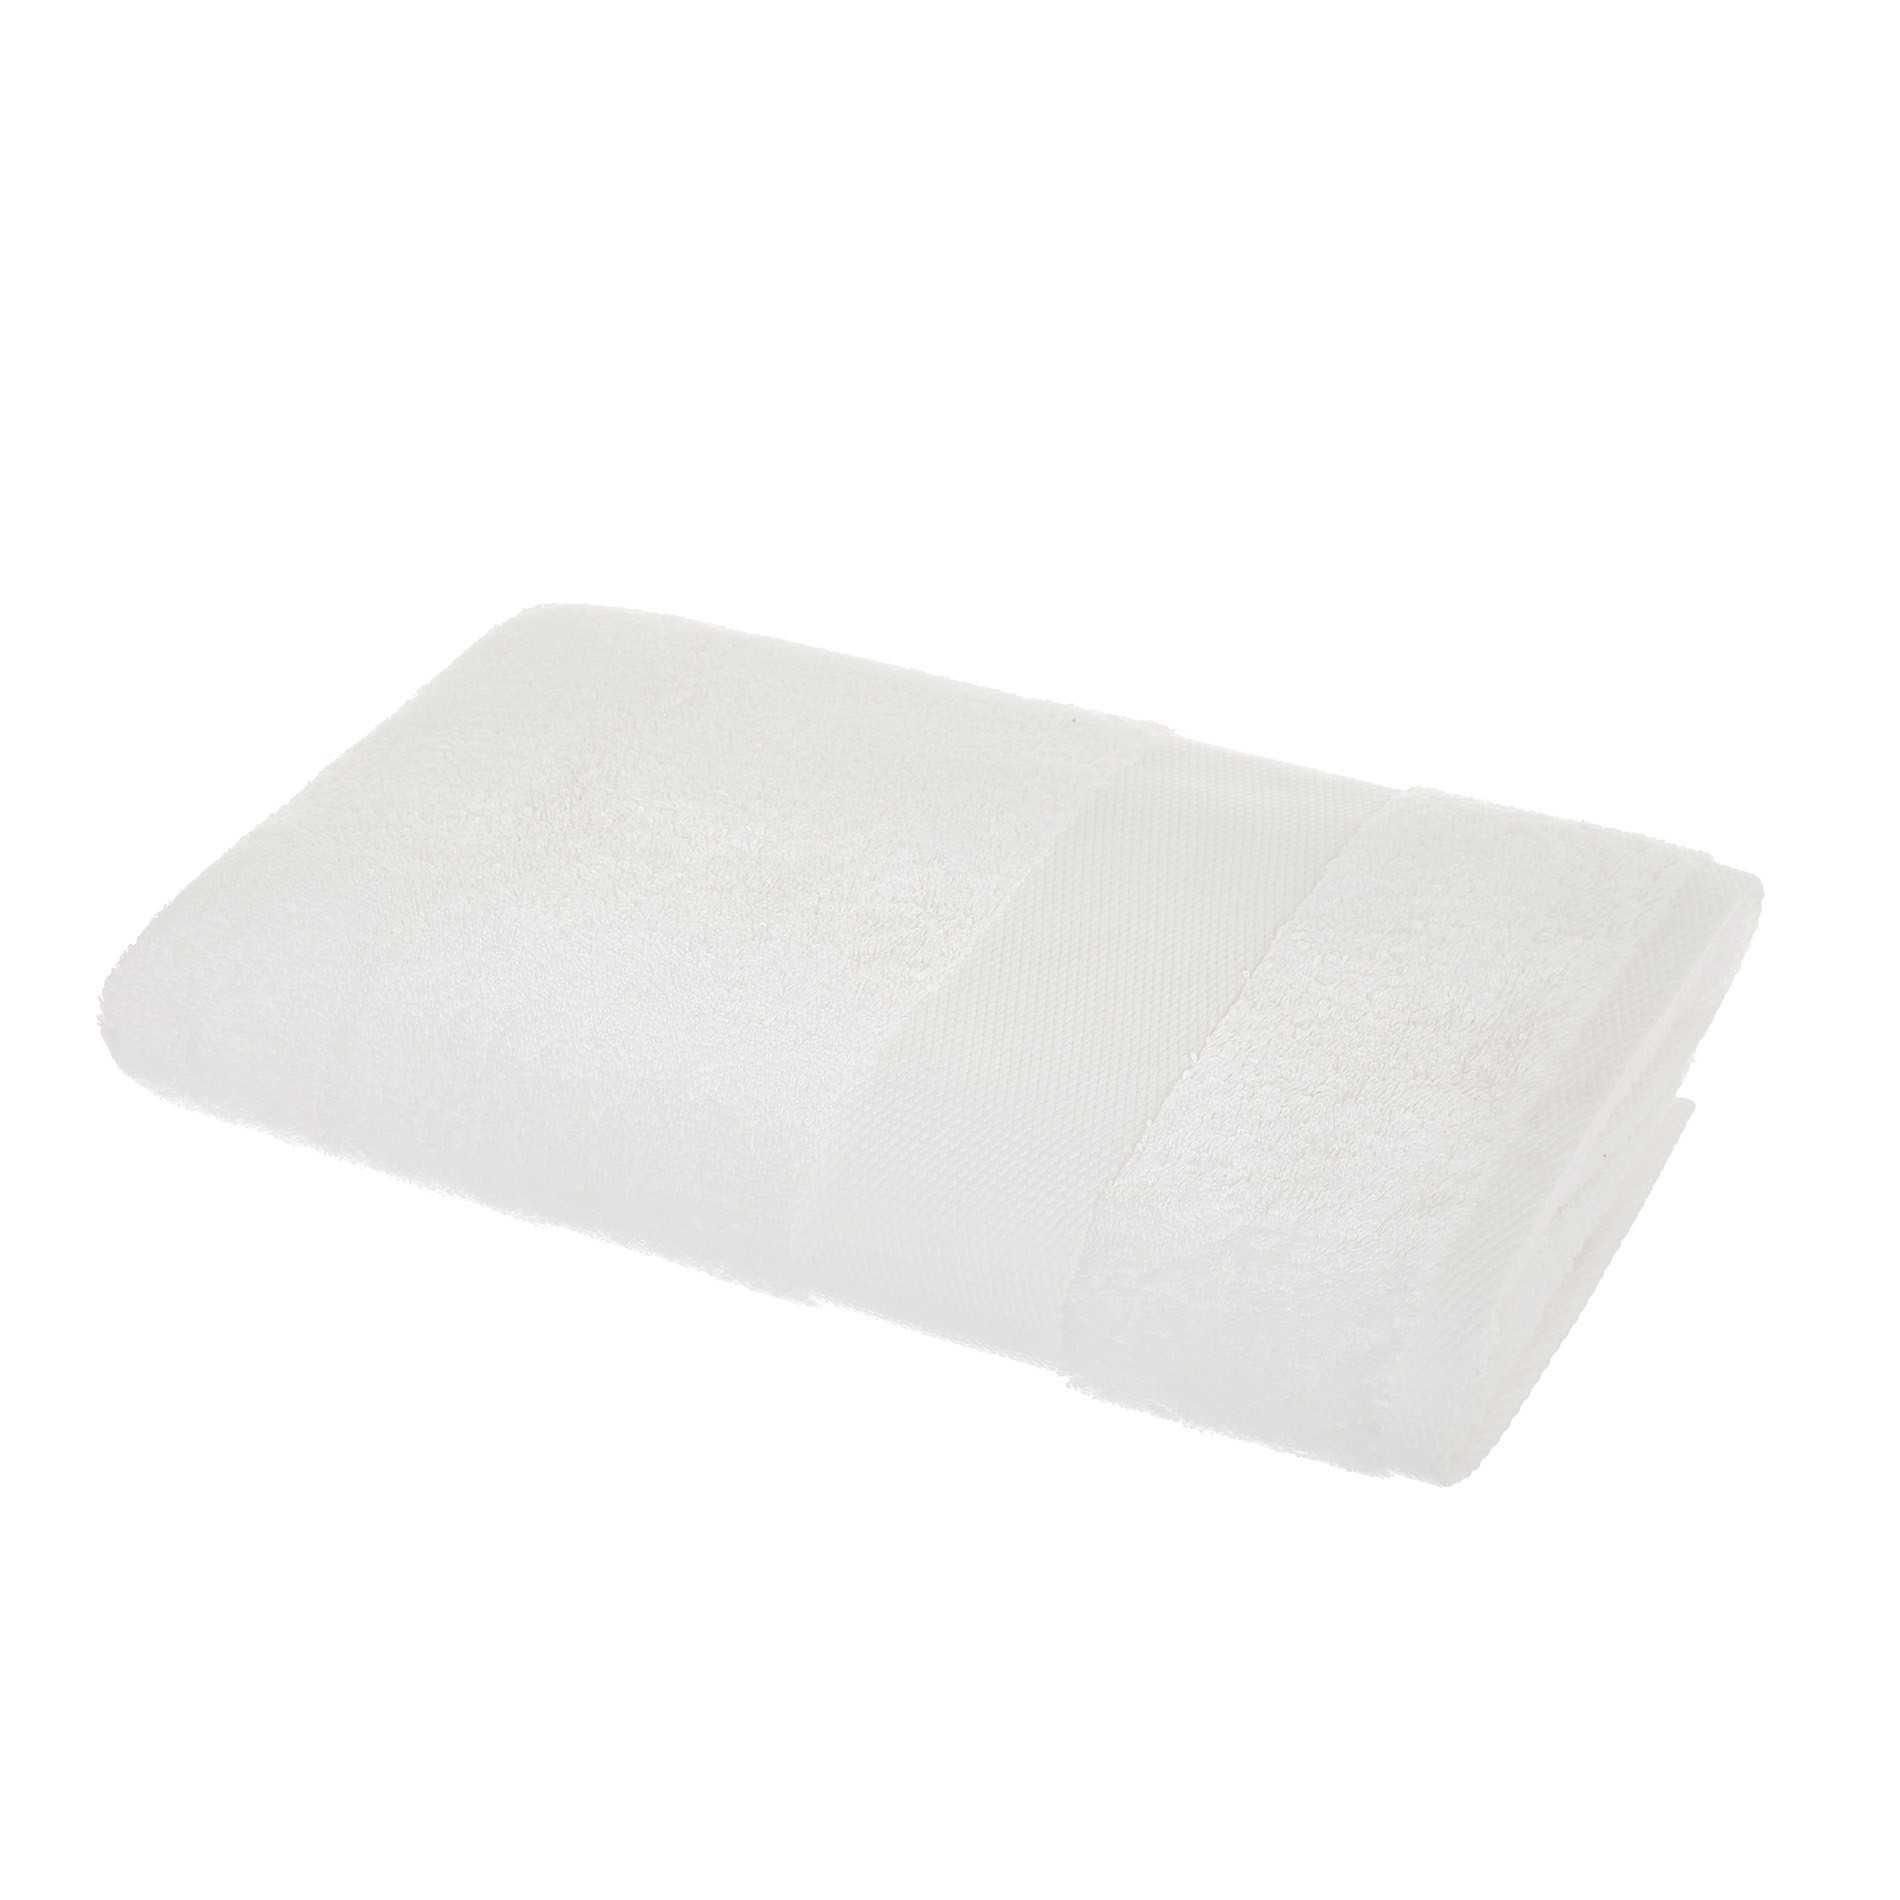 Zefiro pure cotton terry towel, White, large image number 1